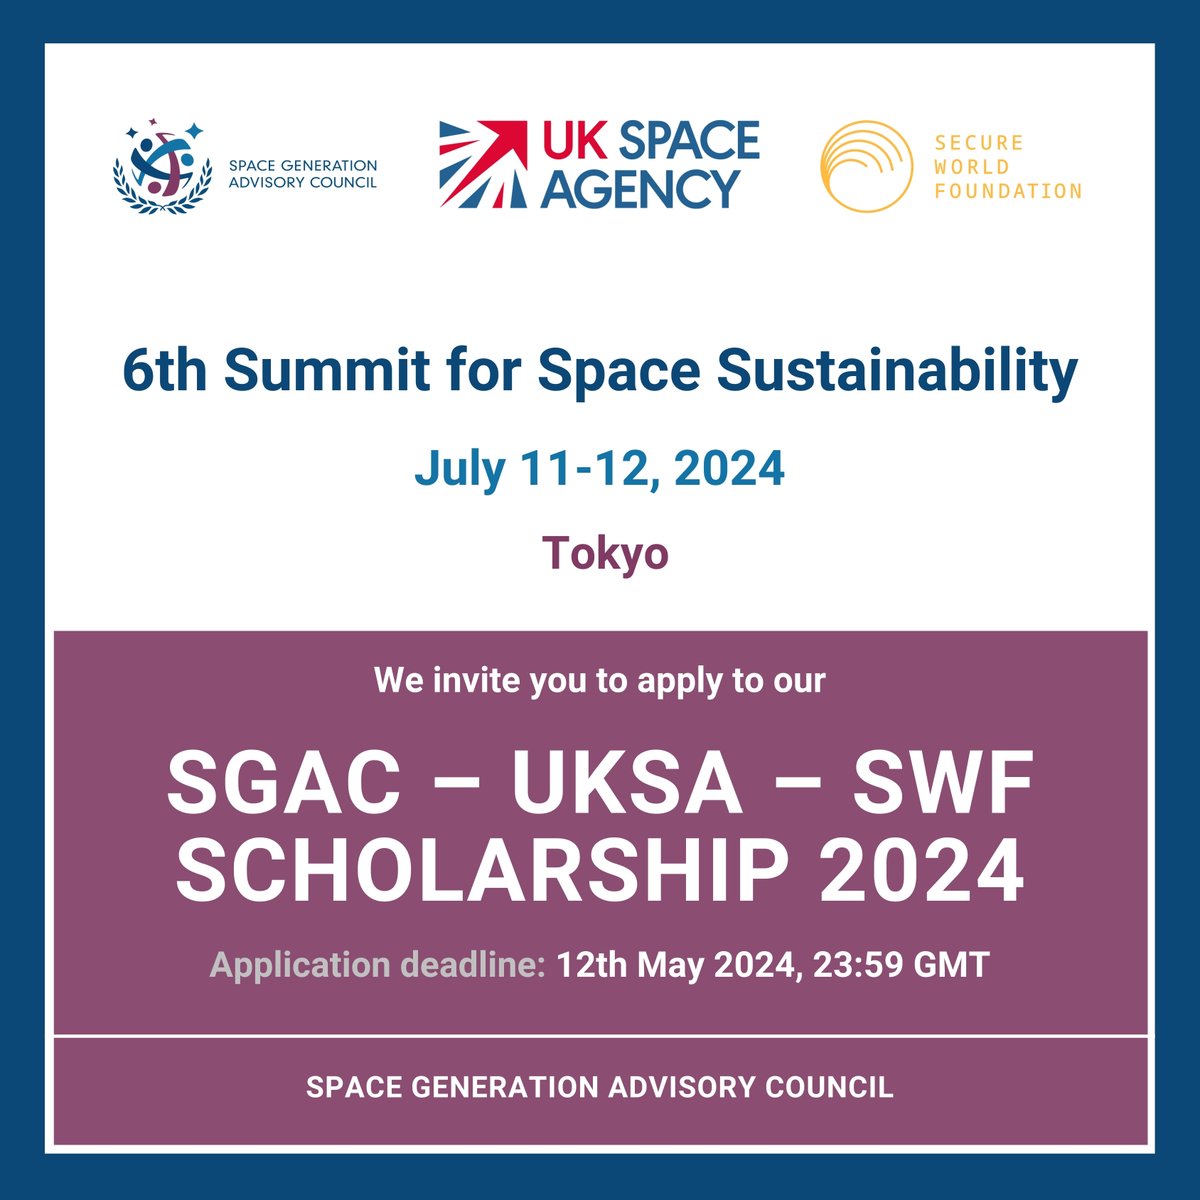 🚀SGAC in partnership with UK Space Agency (UKSA) and Secure World Foundation (SWF), is offering the SGAC – UKSA – SWF Scholarship 2024! 🎓 Deadline: May 12, 2024. ⏰ Apply here: ow.ly/wz7w50RzNuc #SGAC #UKSA #SWF #ScholarshipOpportunity 🛰️📚🌏